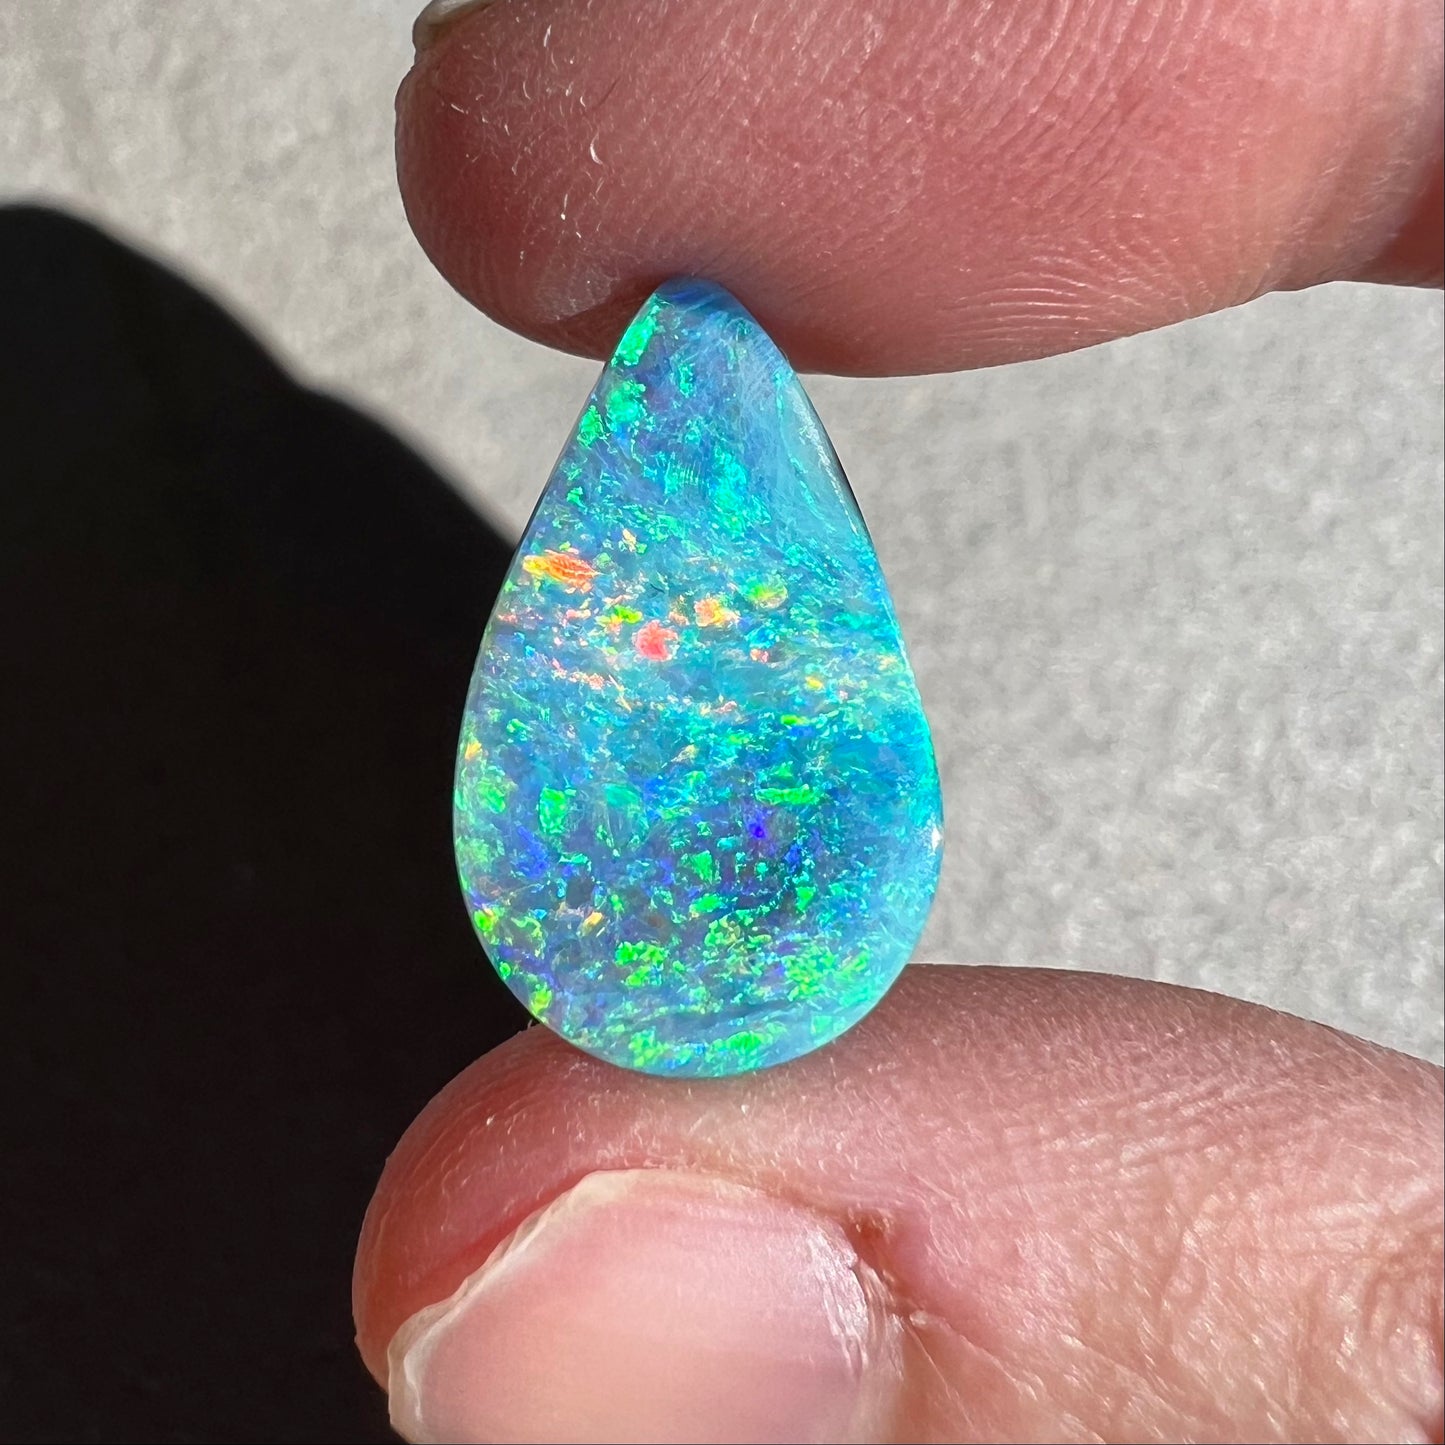 6.38 Ct pink and turquoise boulder opal